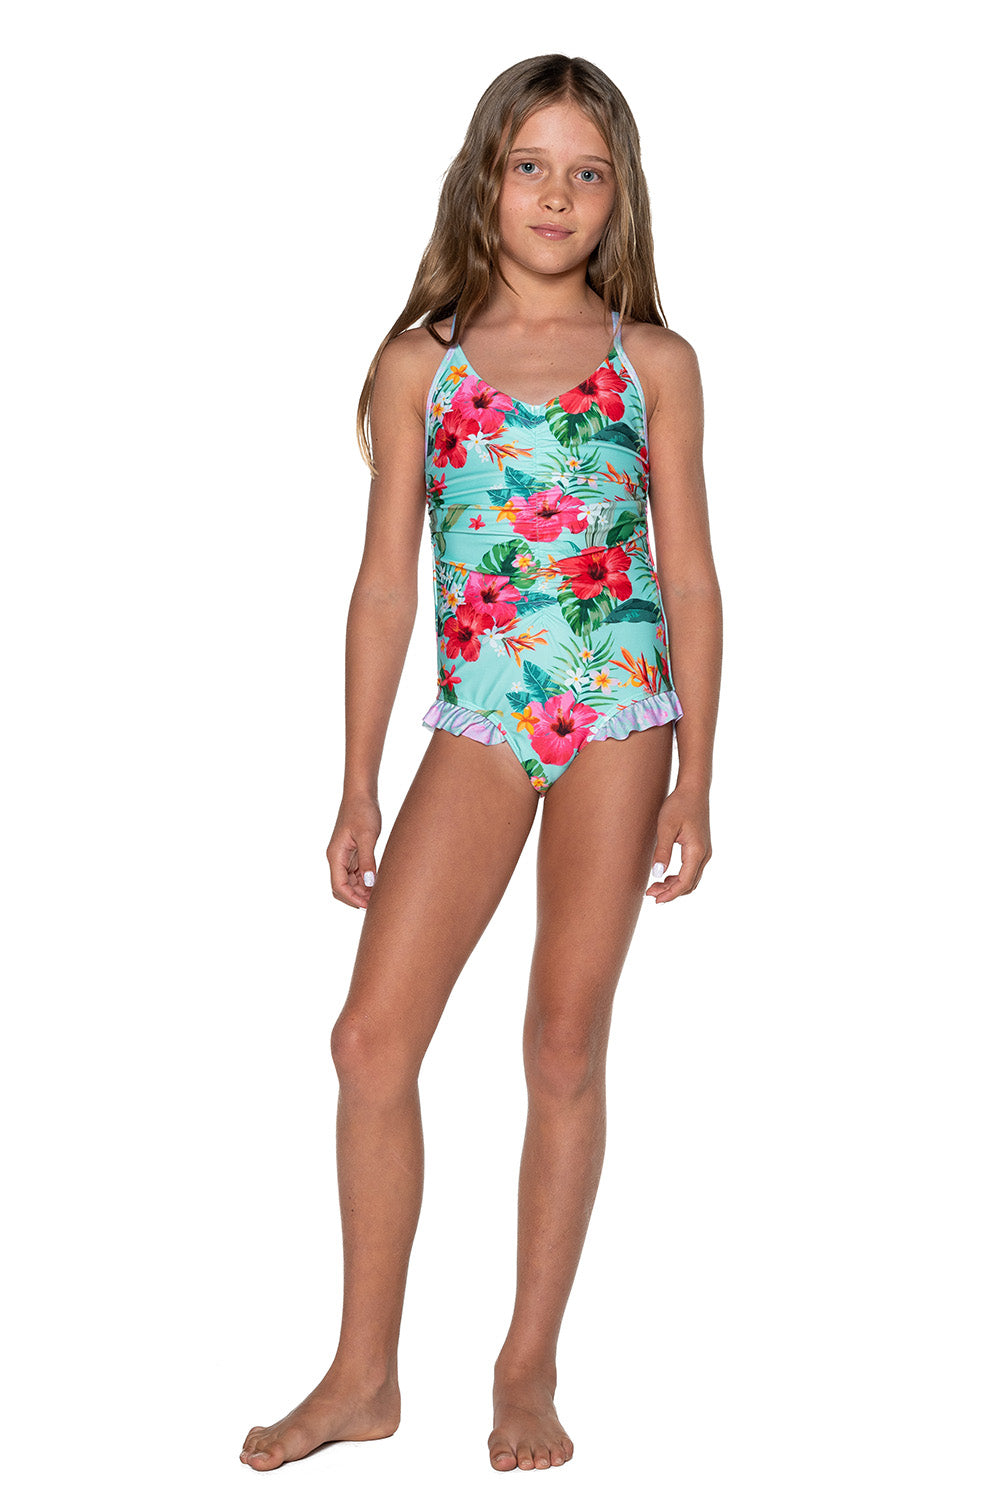 Girls Frilly One Piece Swimsuit - Blue Hawaiian Floral - Moana - Front